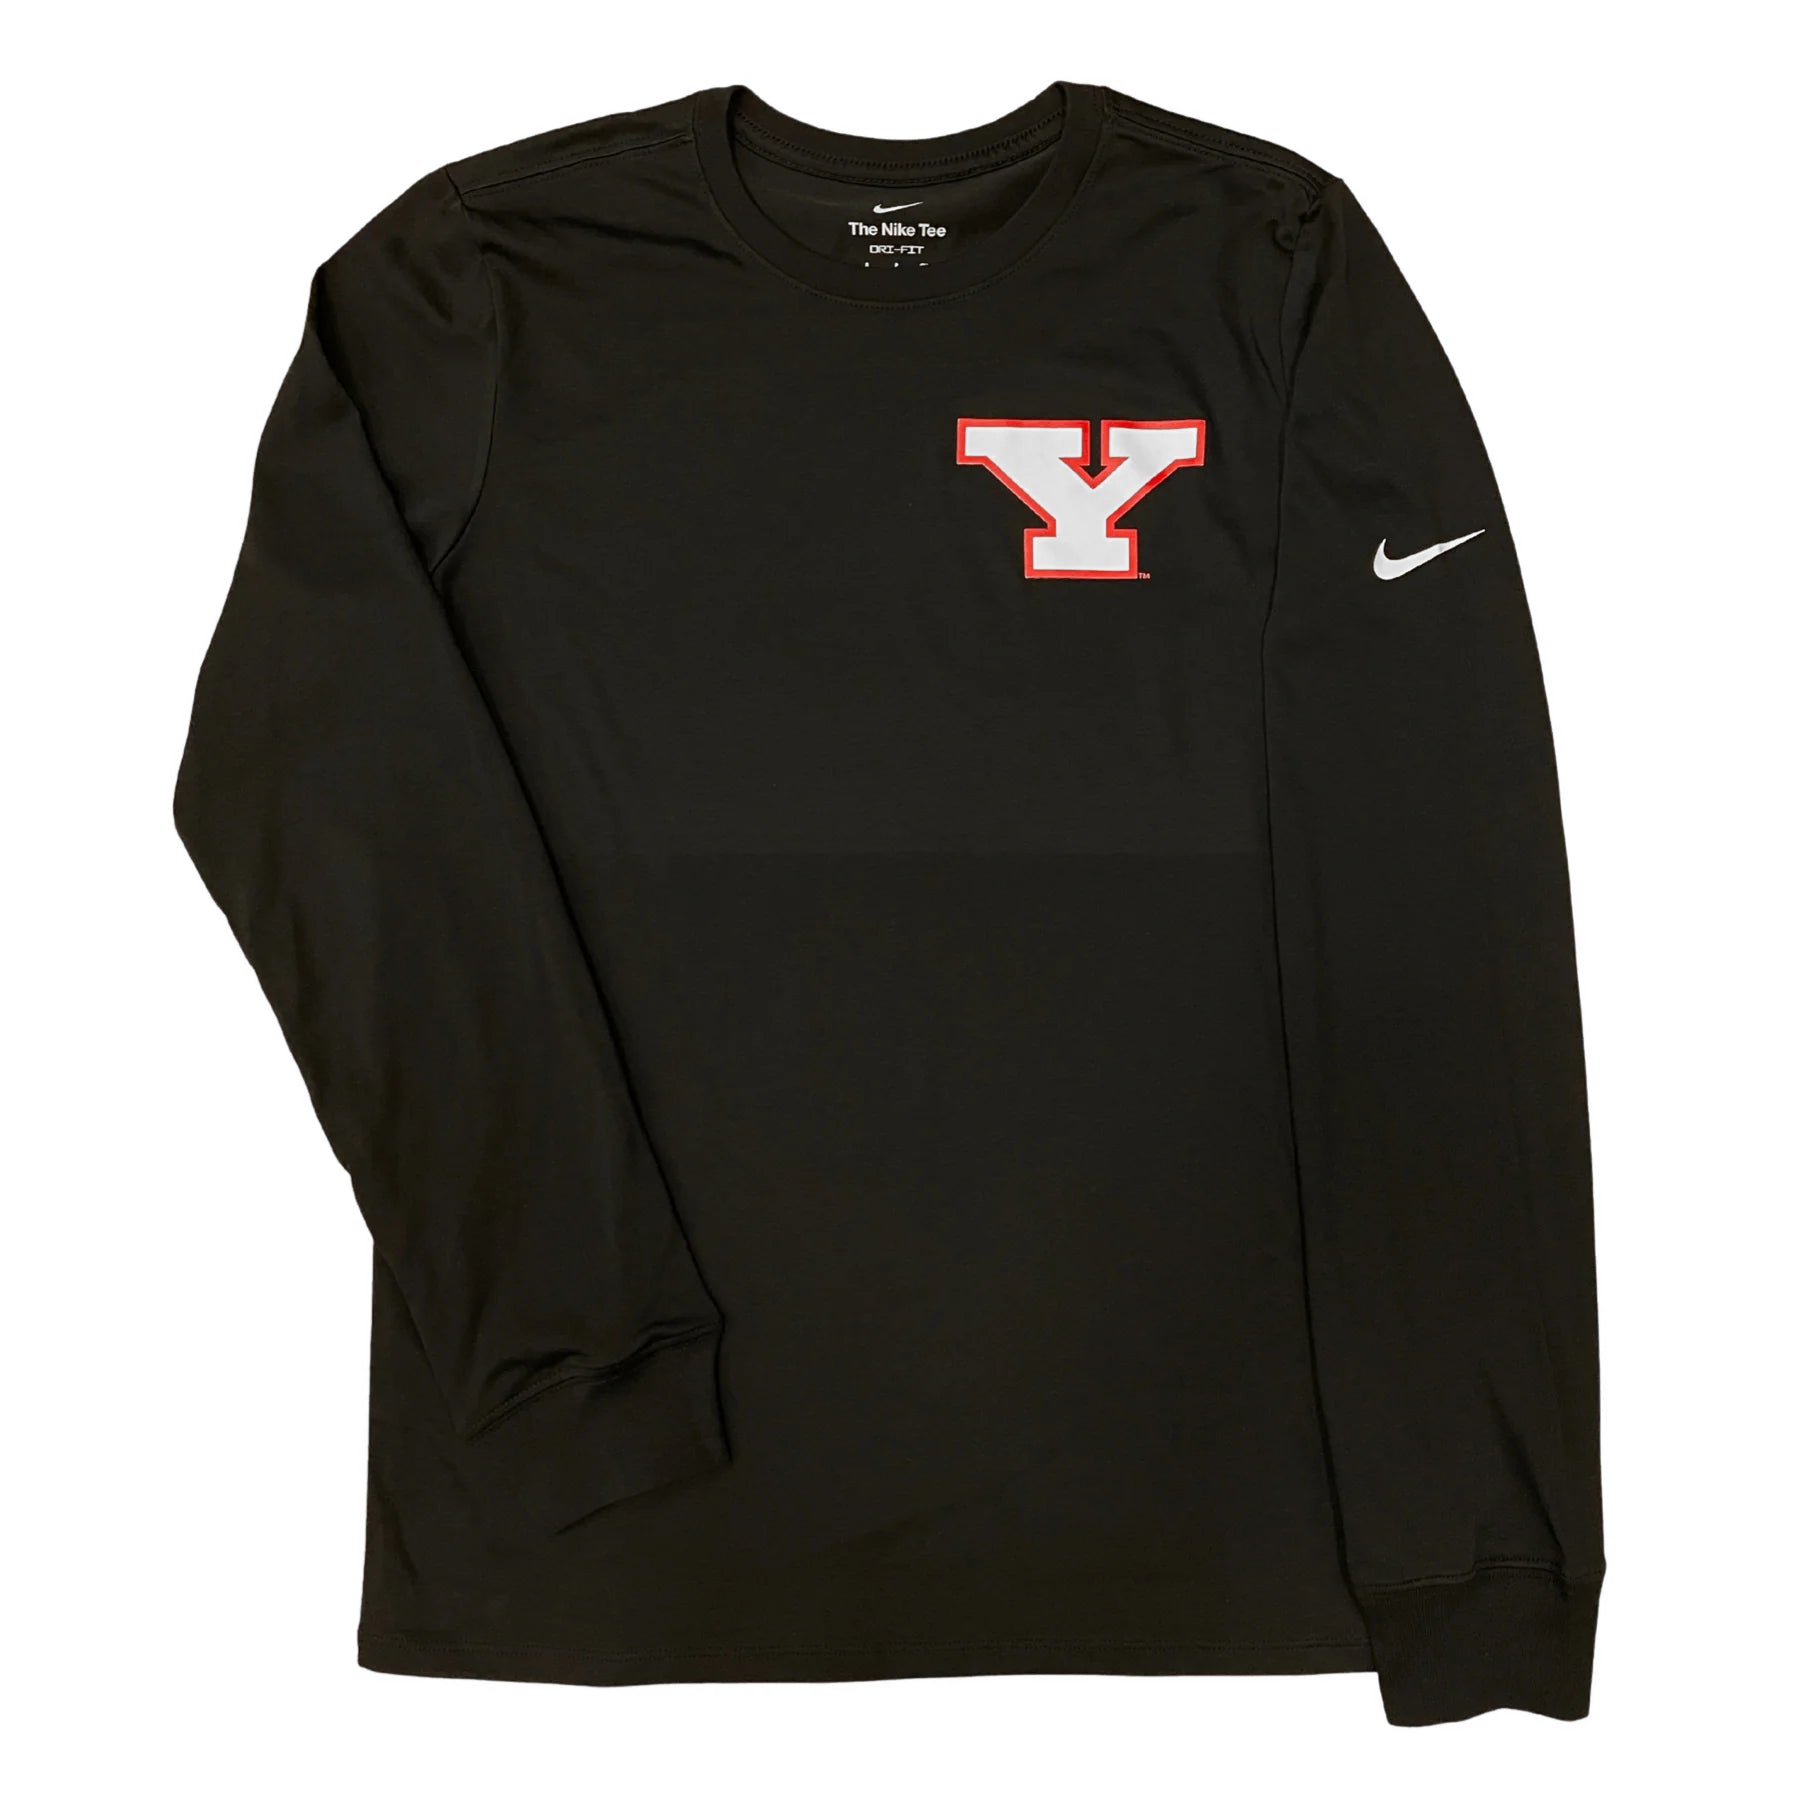 Block Nike (Black) Y Youngstown Sleeve Long T-Shirt State